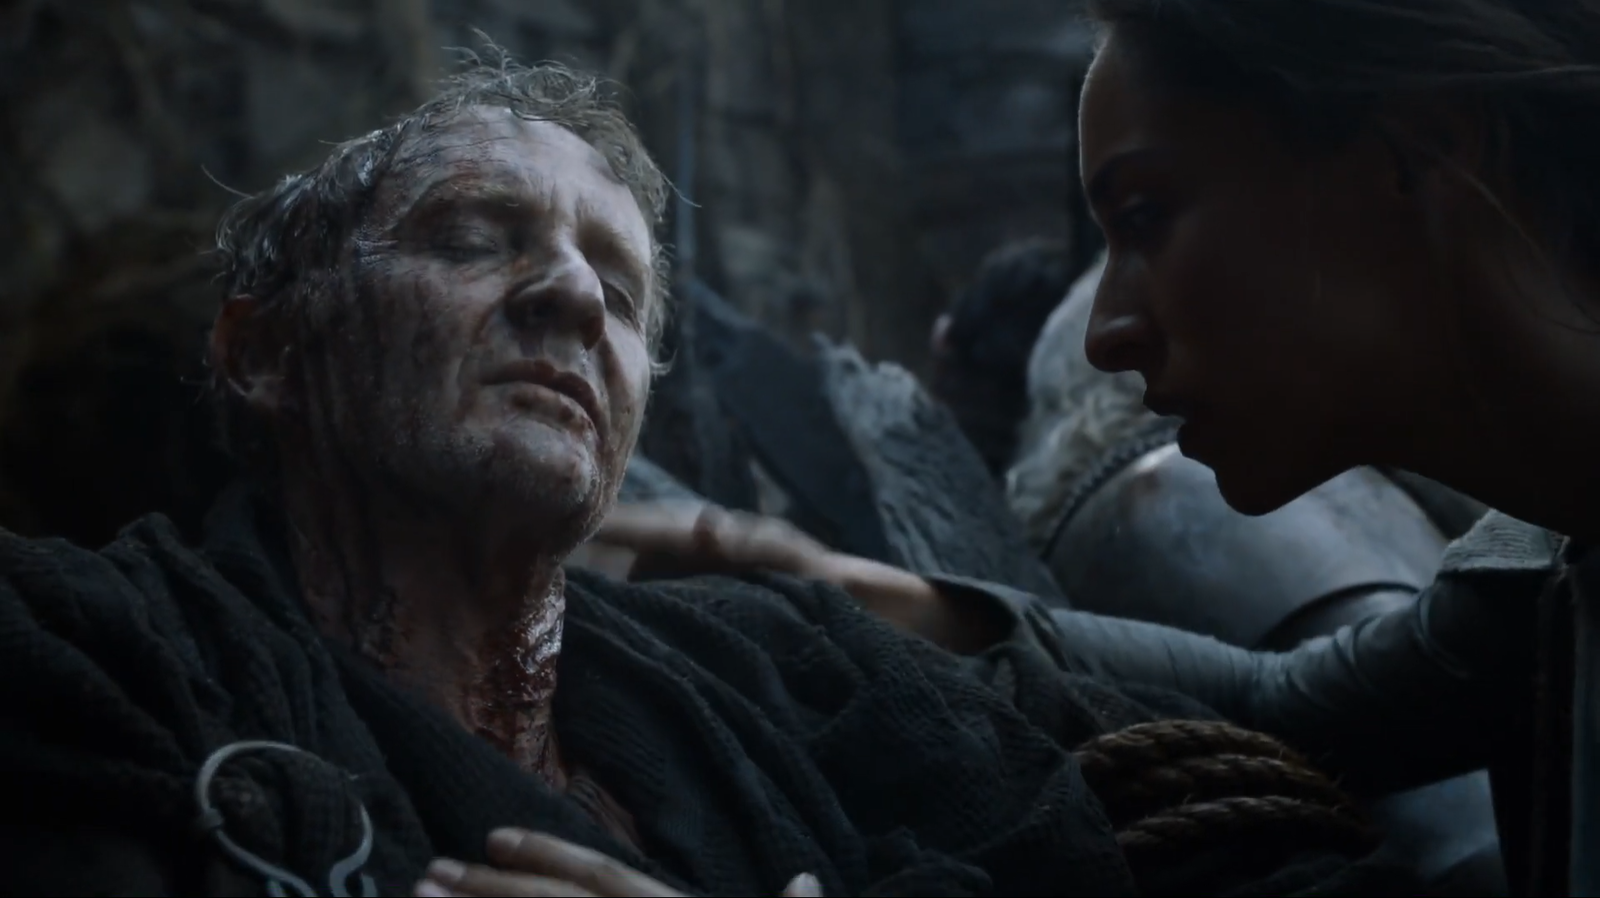 Qyburn's first appearance in the series - Game of Thrones, Frame